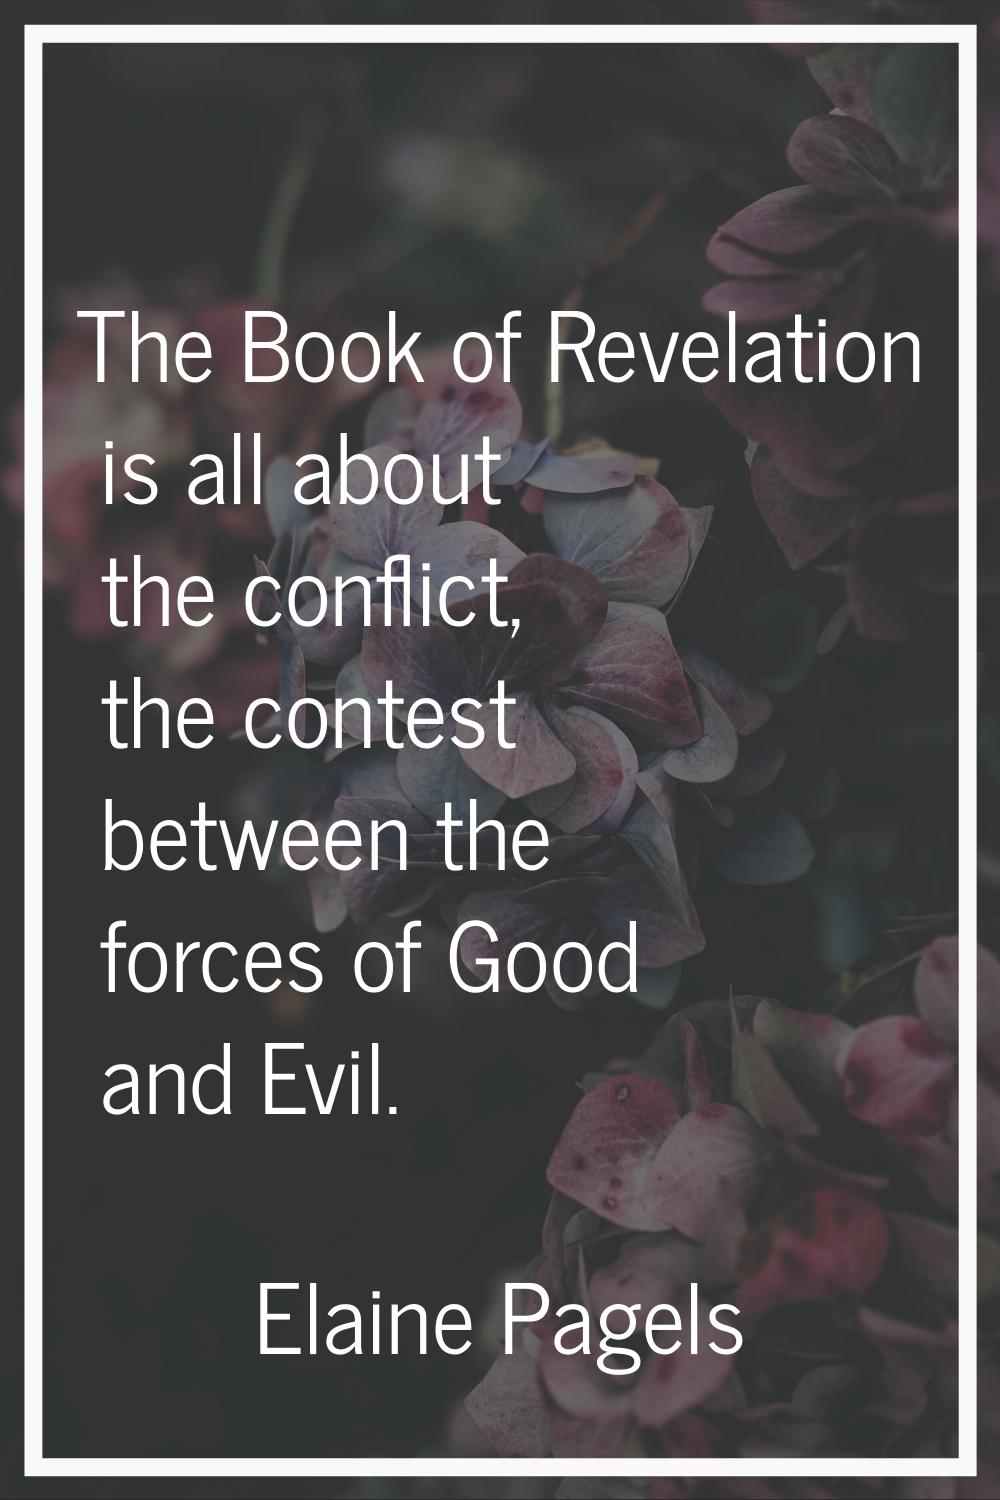 The Book of Revelation is all about the conflict, the contest between the forces of Good and Evil.